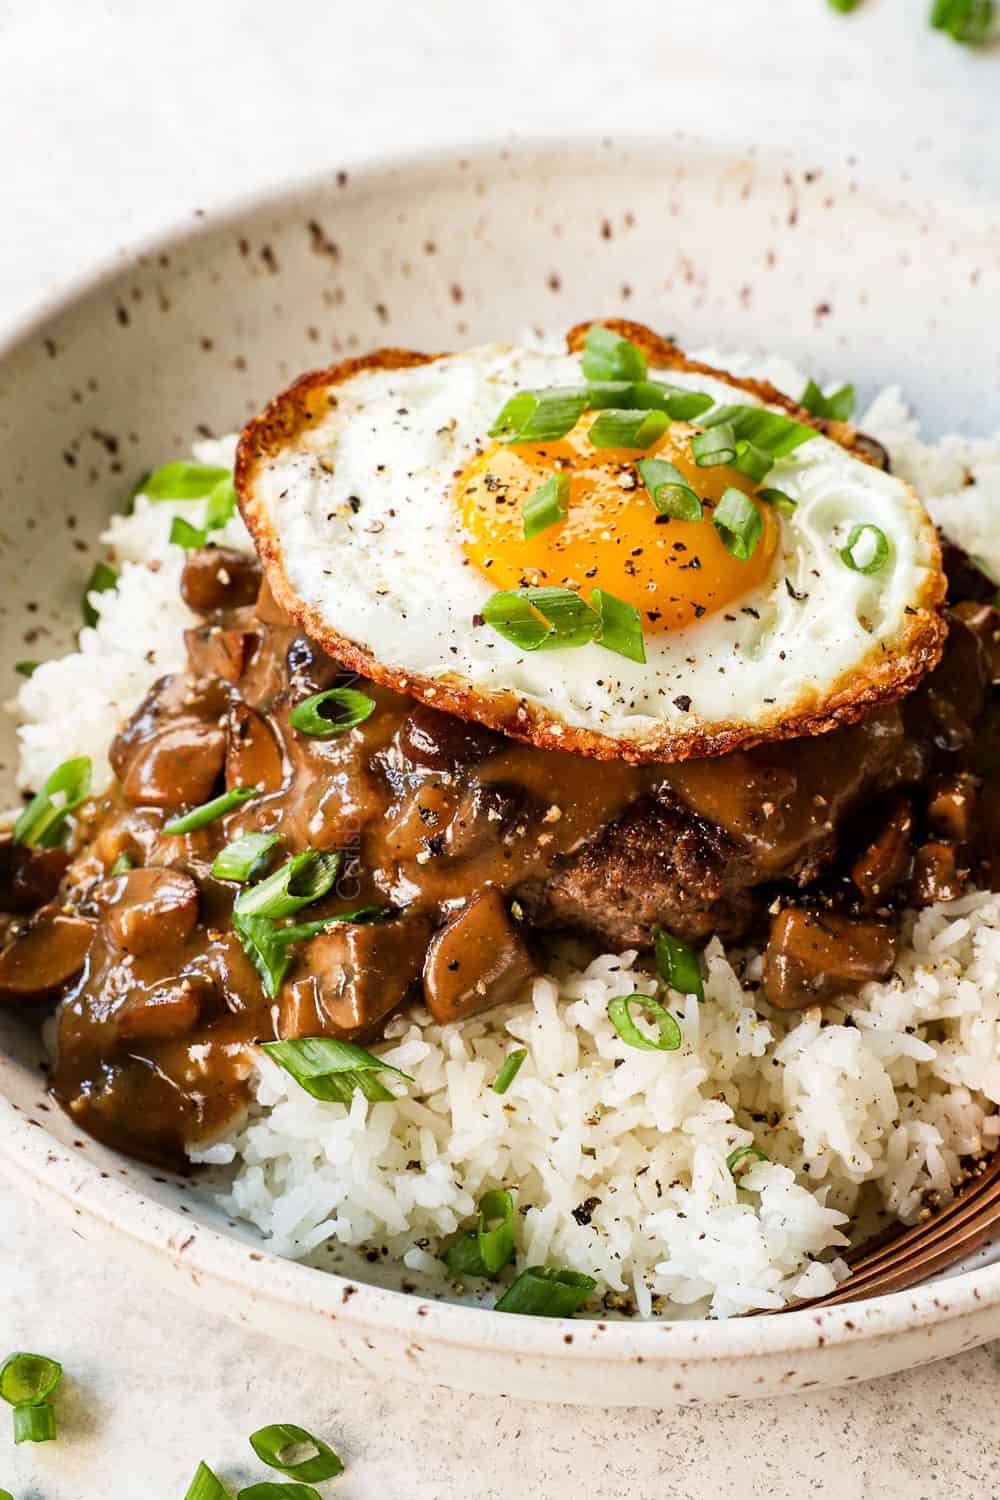 loco moco recipe with hamburger patty, mushroom gravy and fried egg served over white steamed rice